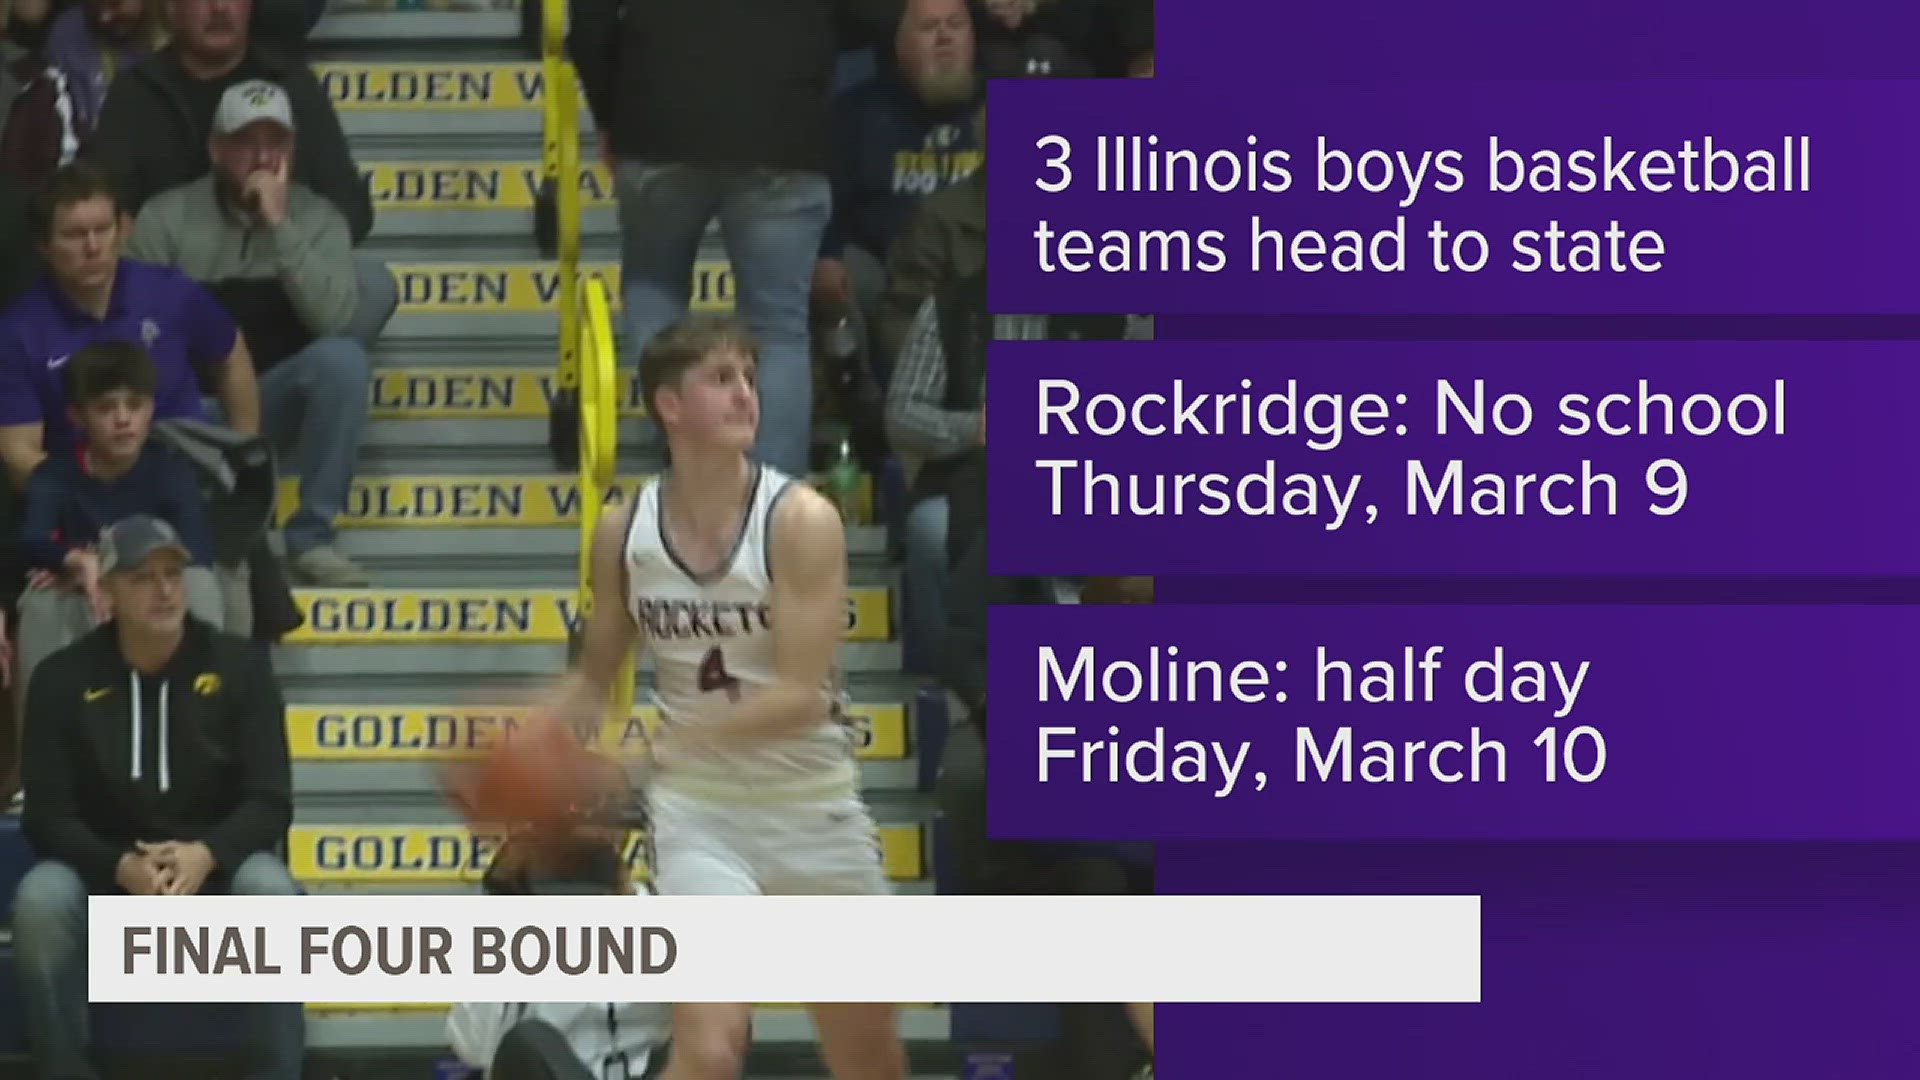 As the Maroons and the Rockets prepare to battle it out for State titles, their school districts are giving students a break from class to support their classmates.